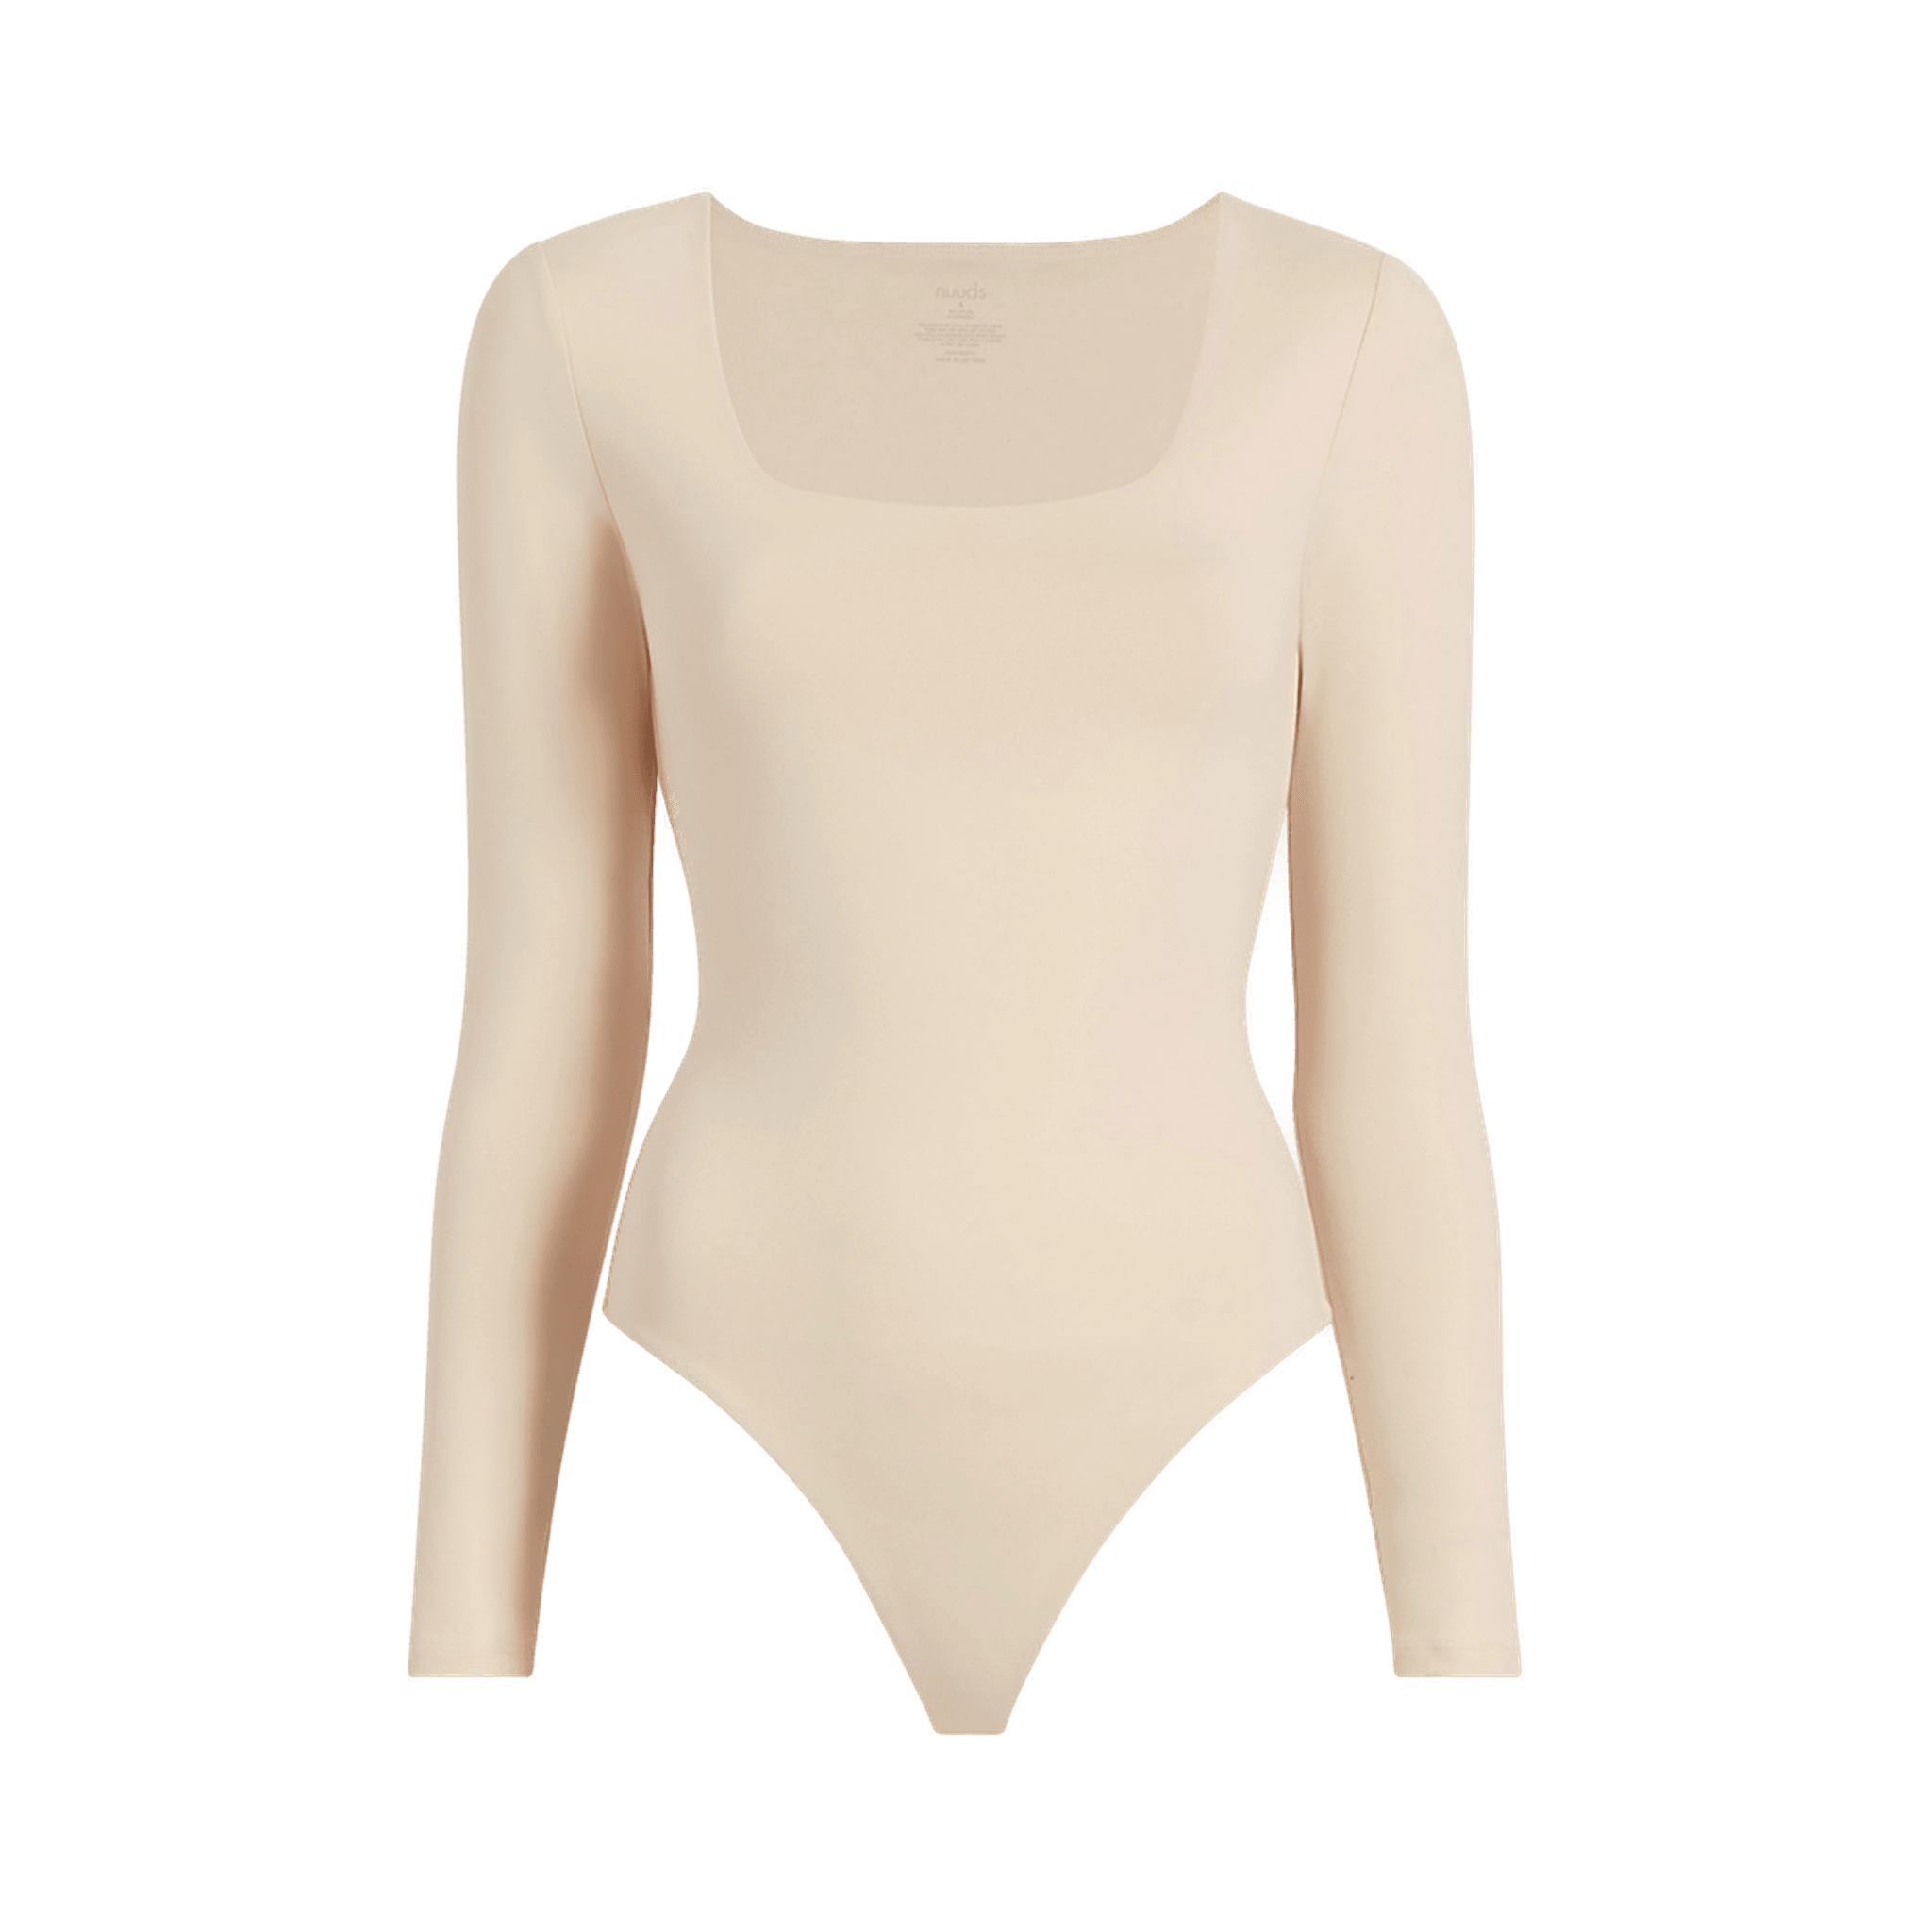 nuuds: your bodysuit collection is growing